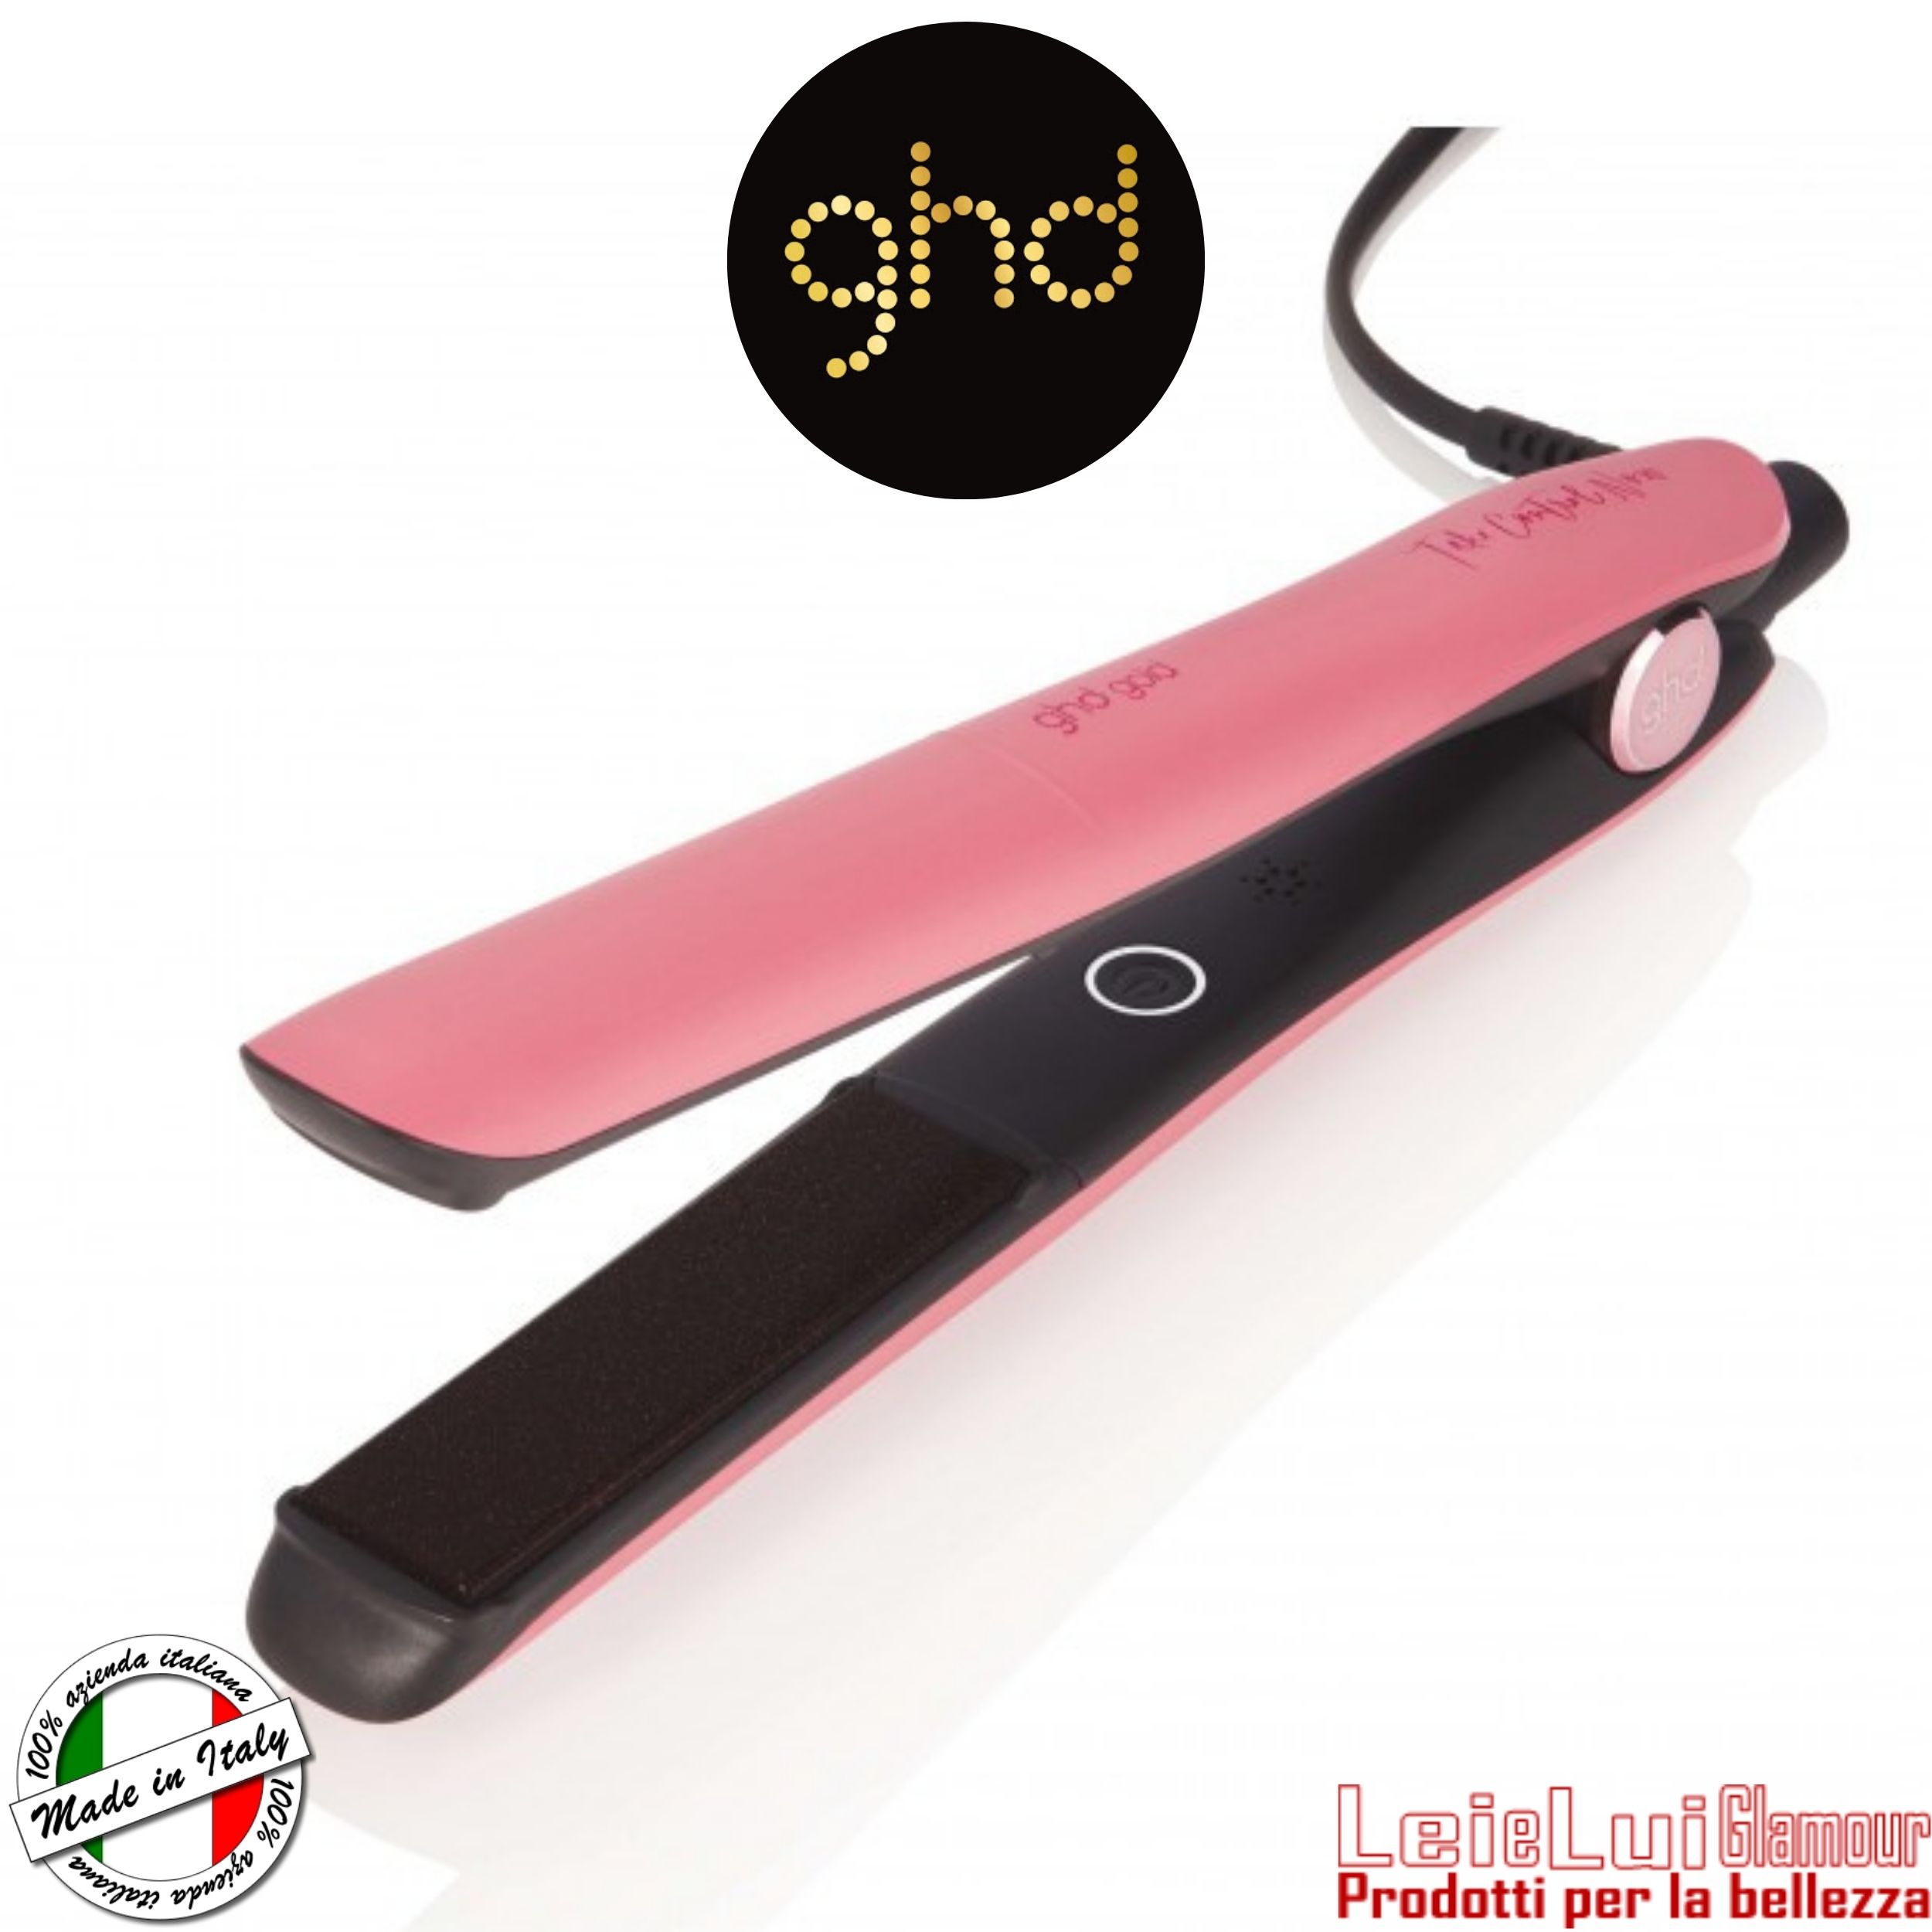 PIASTRA PER CAPELLI GHD GOLD® STYLER IN ROSE PINK – Lei e Lui Glamour